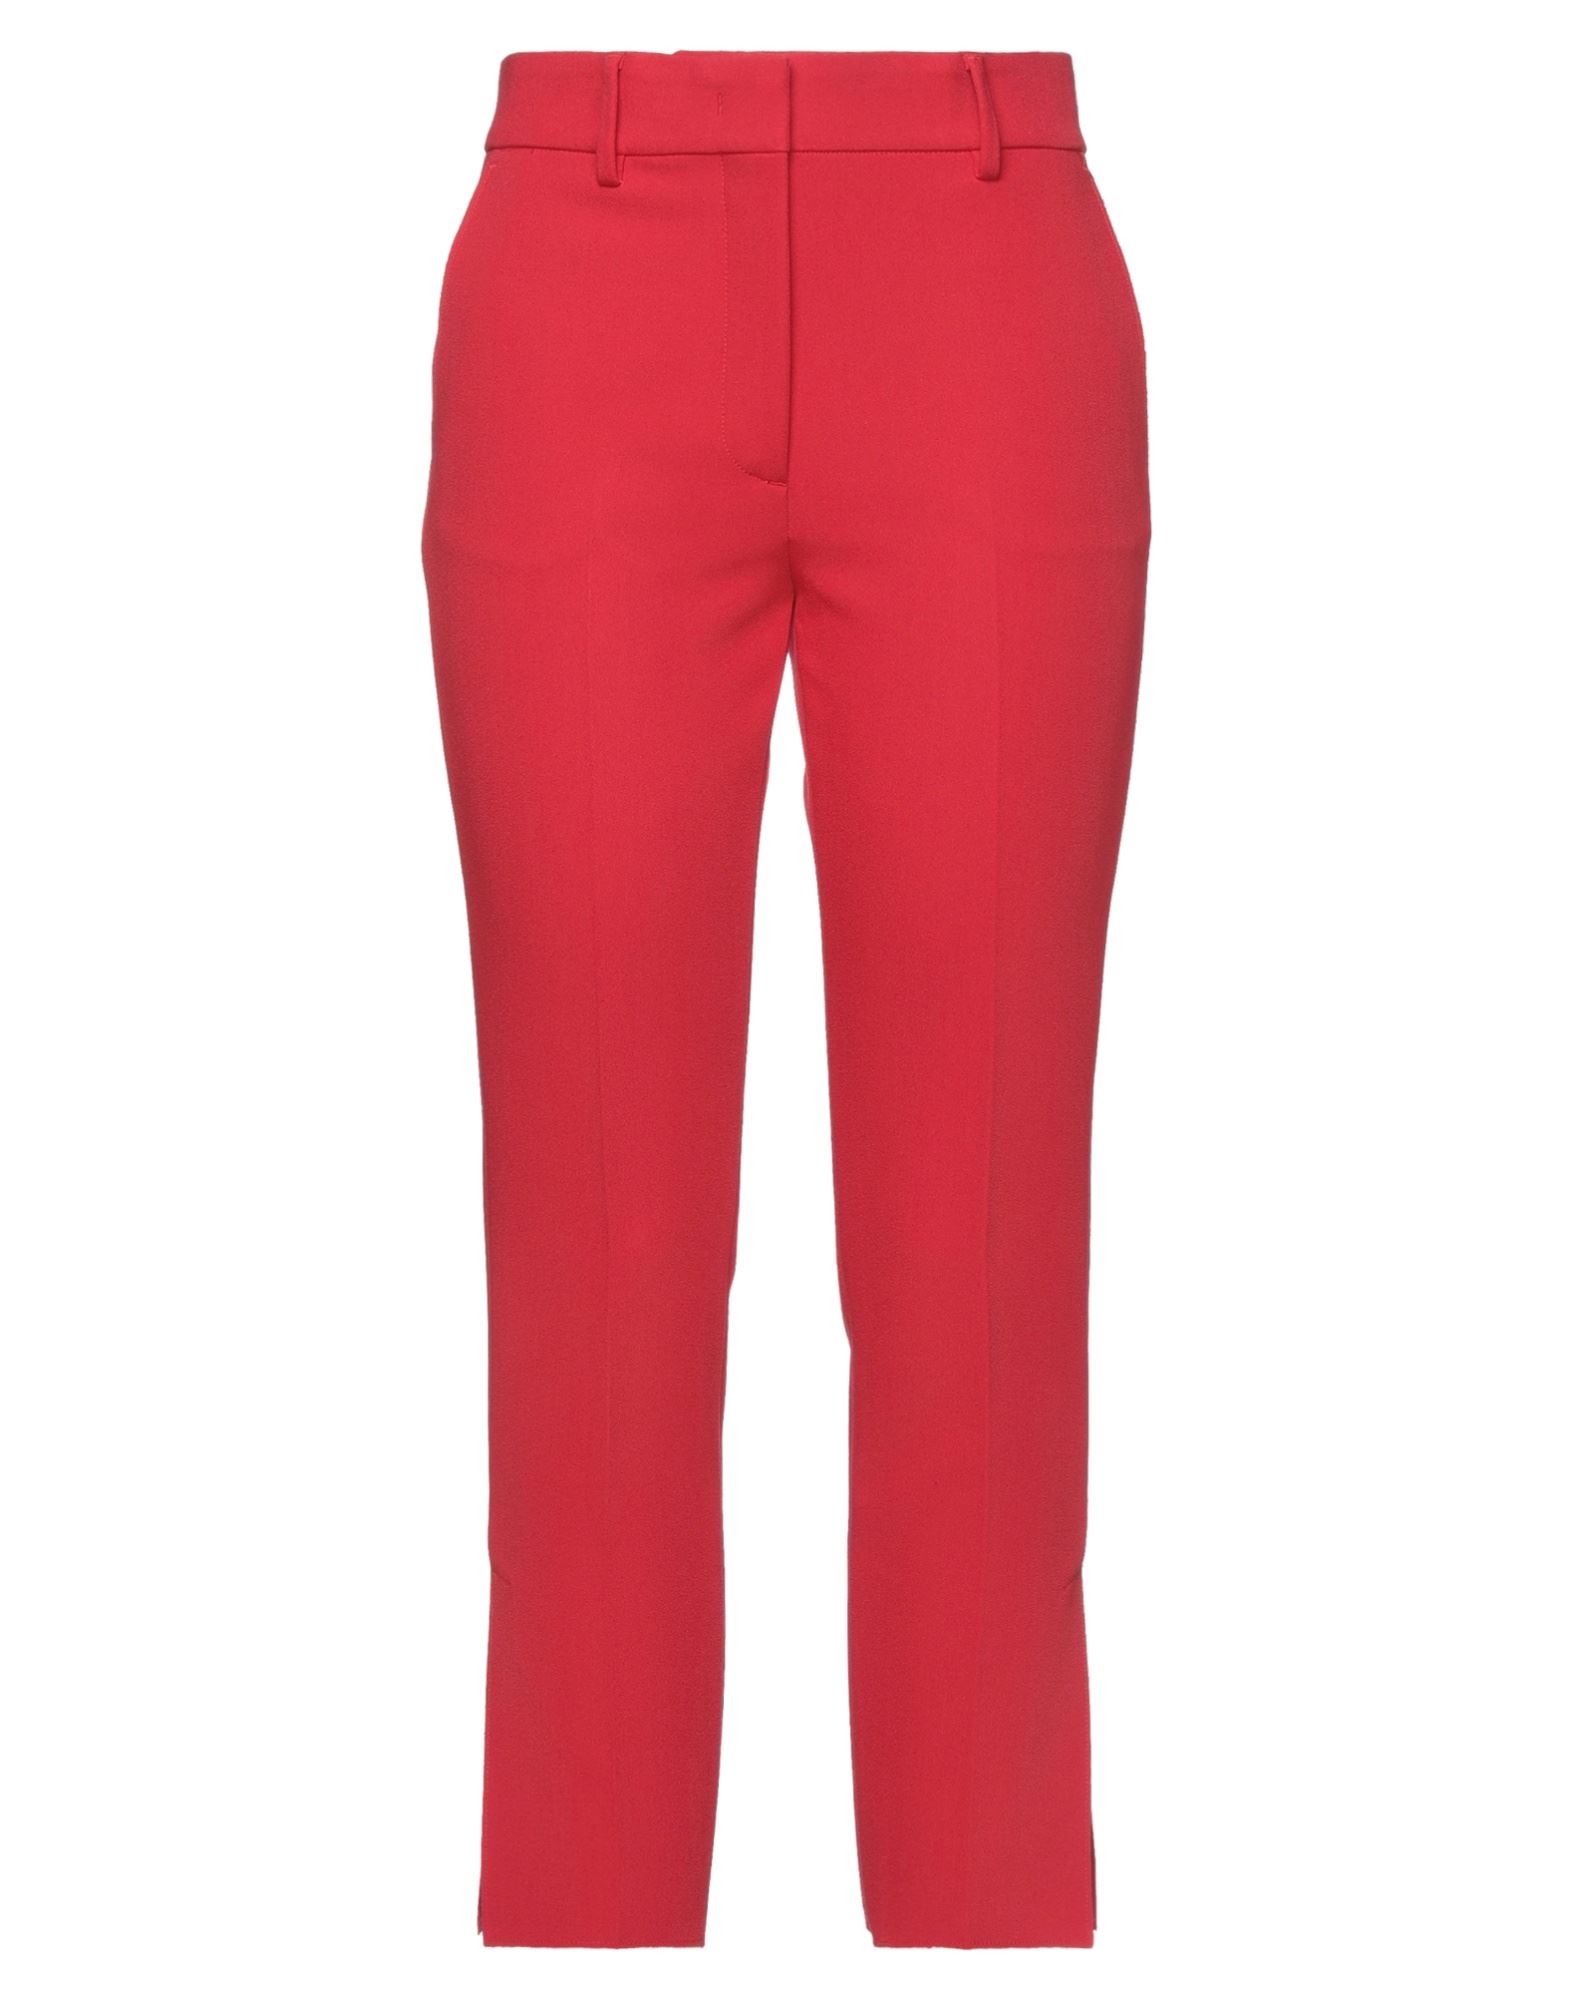 Msgm Woman Pants Red Size 4 Polyester, Viscose, Elastane